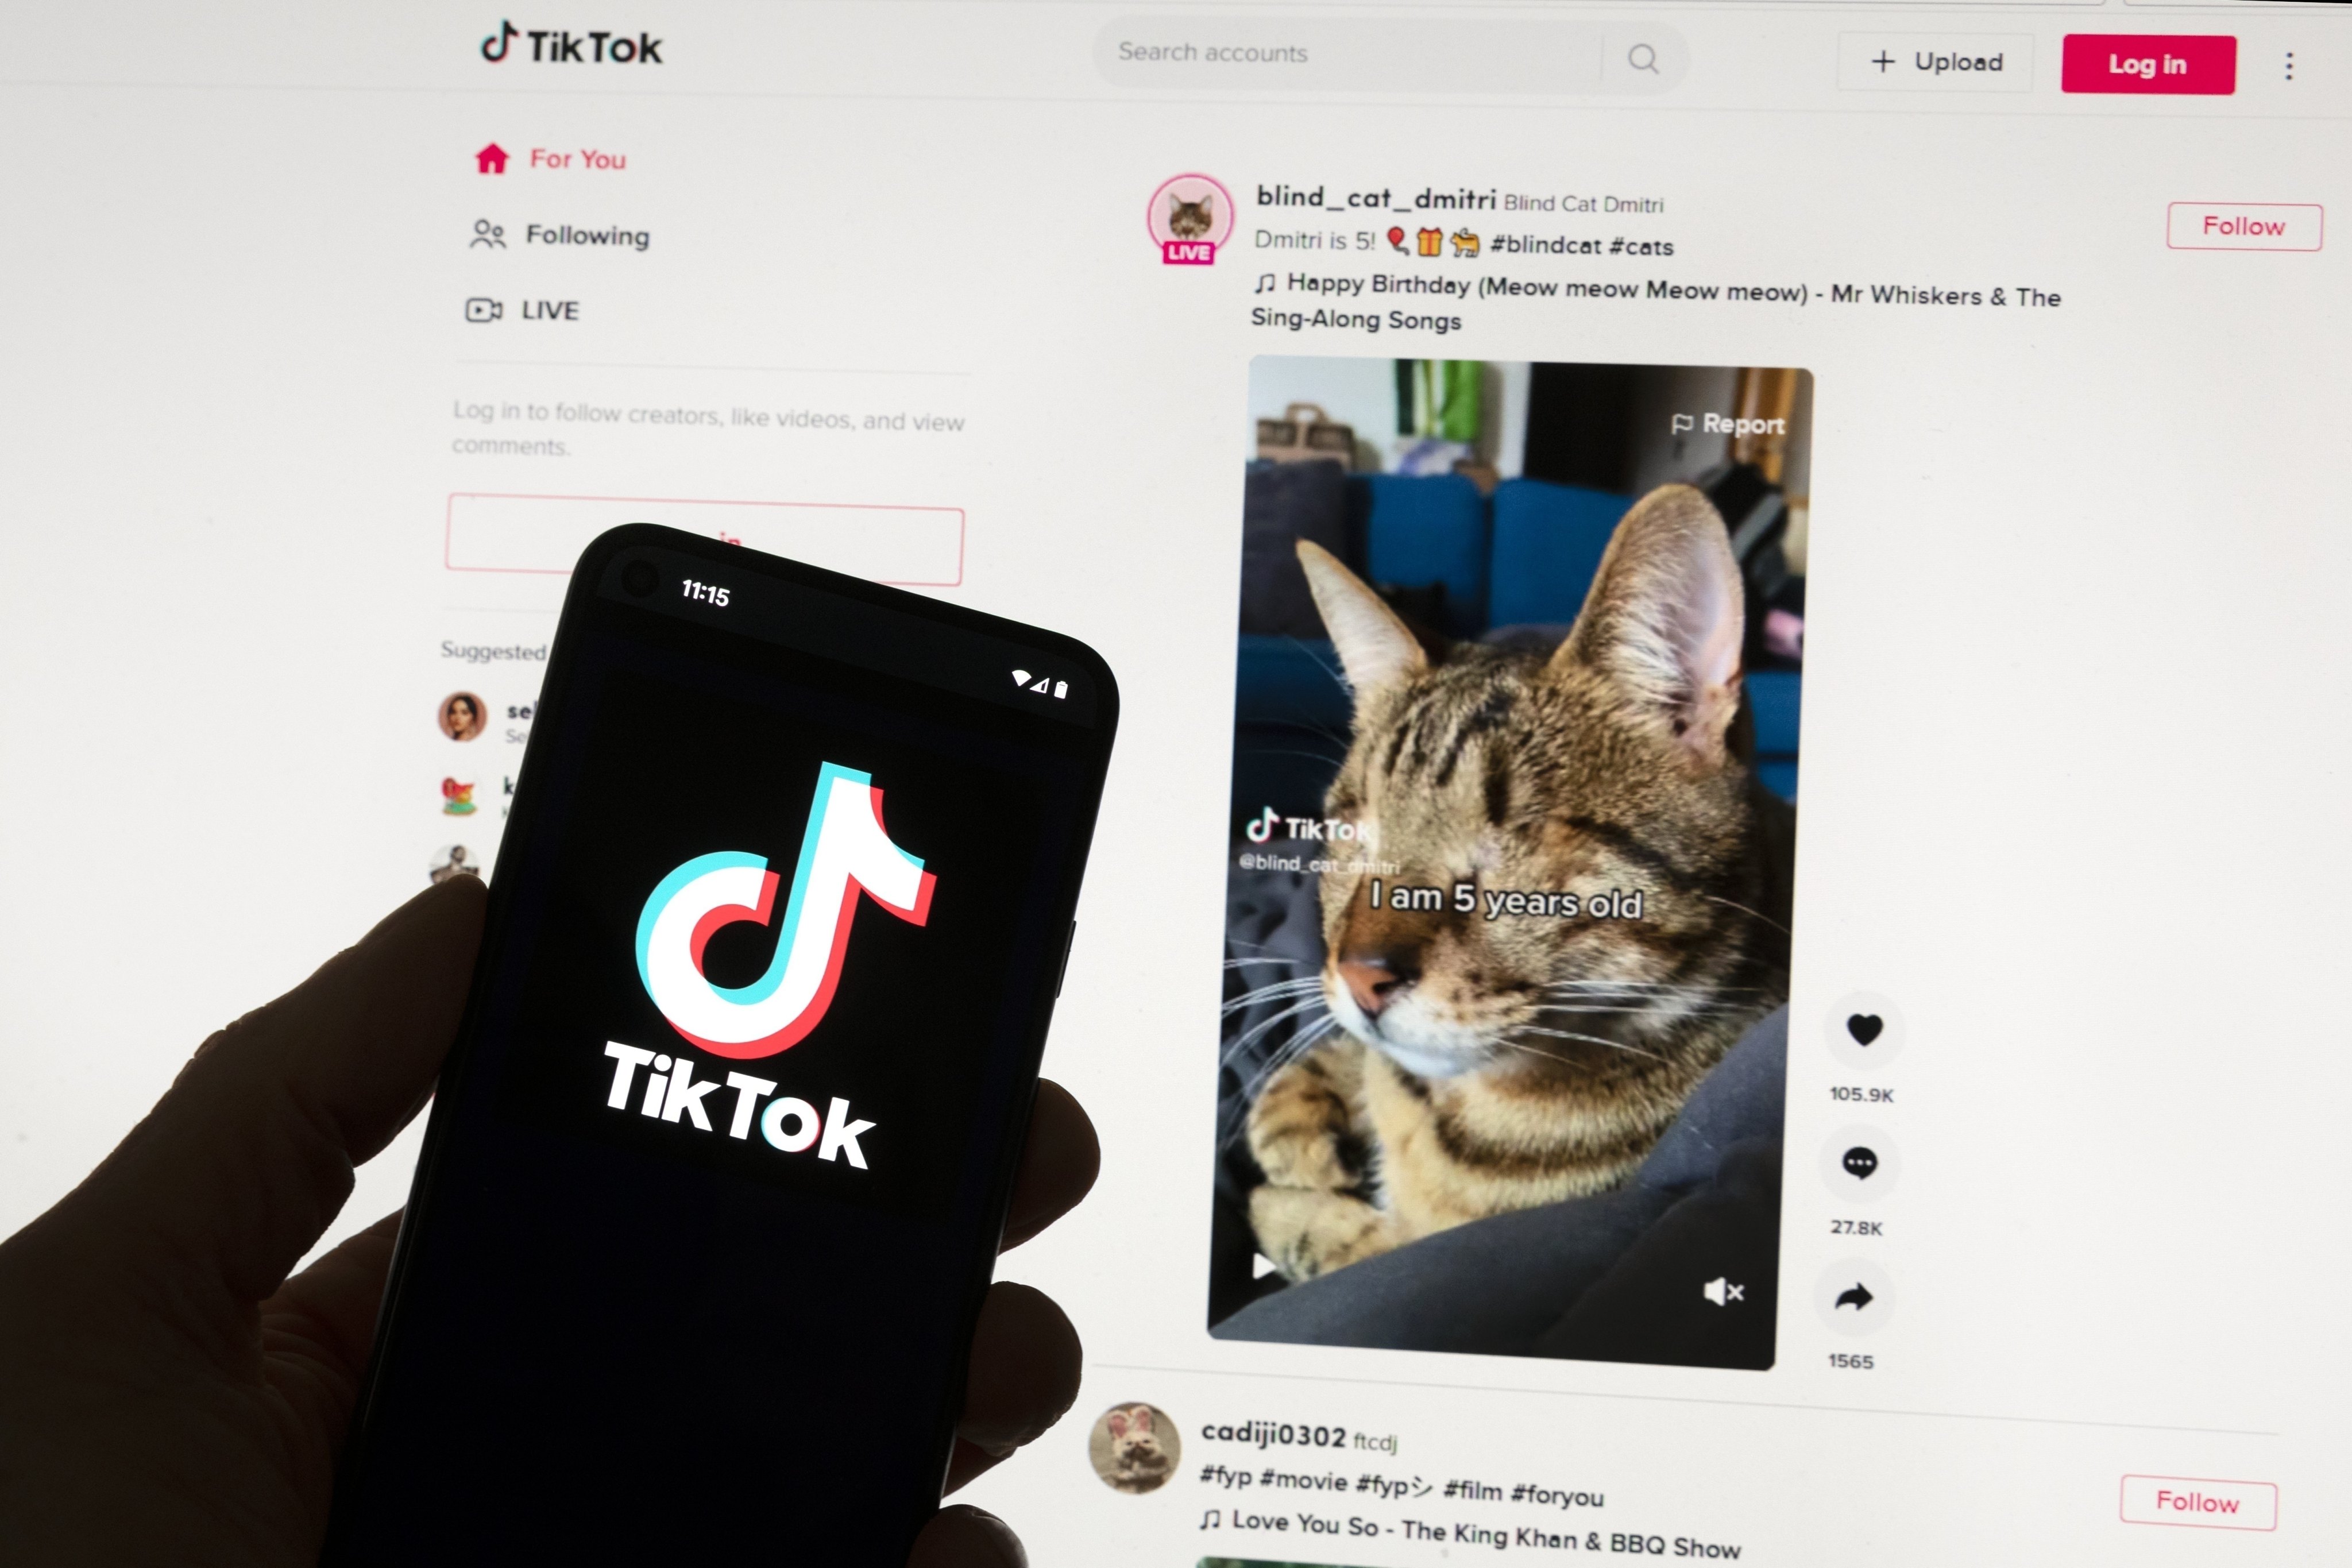 TikTok is testing 60-minute videos, which could be a big threat to YouTube. Photo: AP